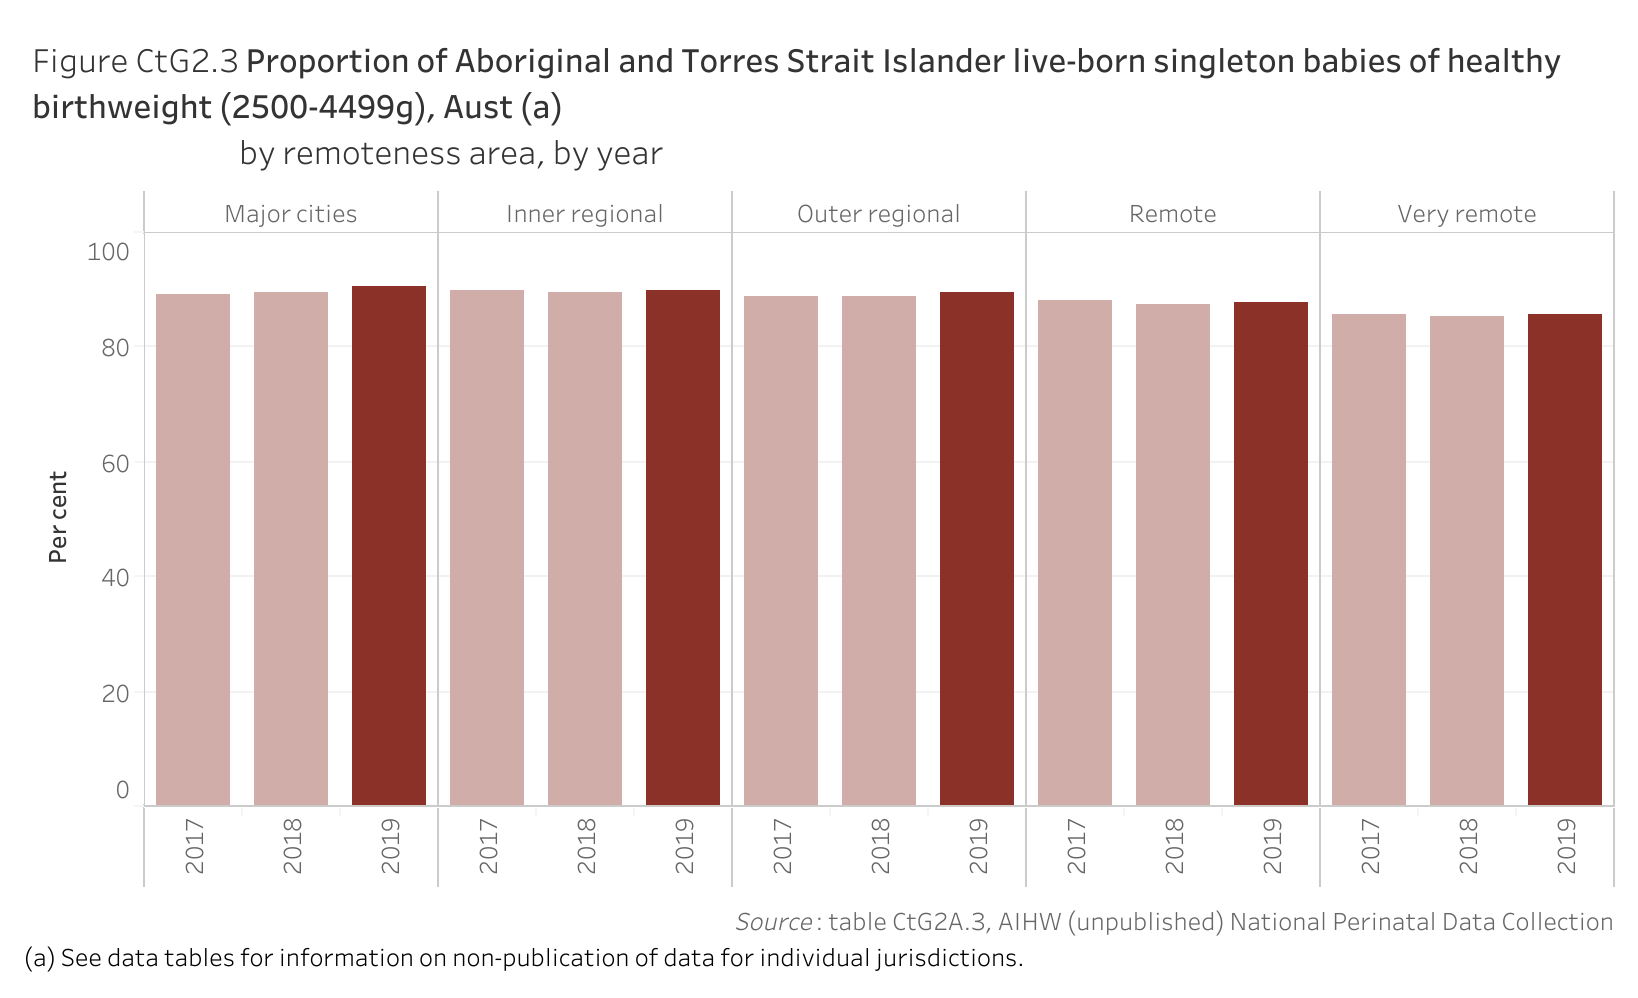 Figure CtG2.3. Bar chart showing the proportion of Aboriginal and Torres Strait Islander live-born singleton babies of healthy birthweight (2500-4499g) in Australia, by remoteness area and by year. Data table of figure CtG2.3 is below.